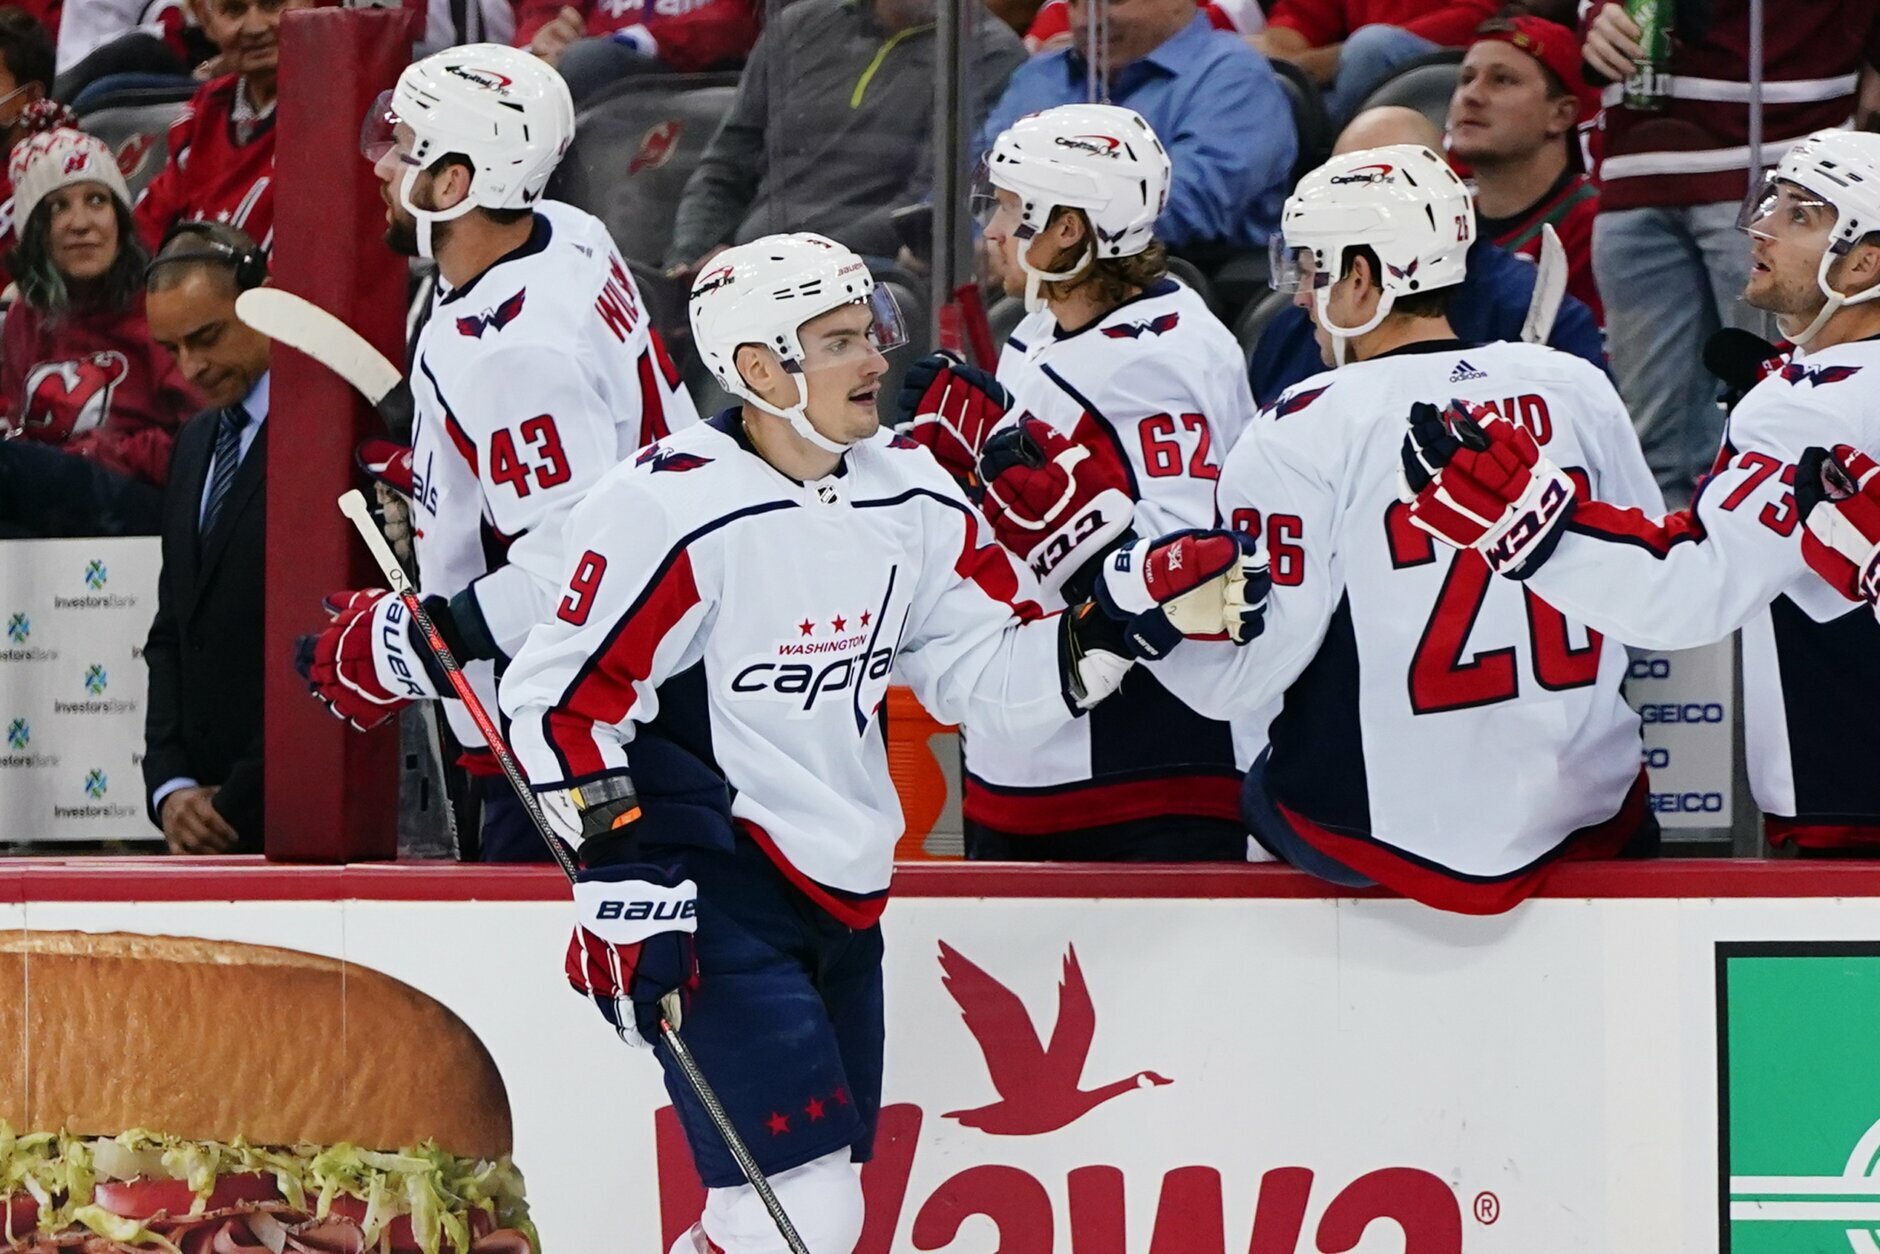 Washington Capitals' Dmitry Orlov (9) celebrates with teammates after scoring a goal during the first period of the team's NHL hockey game against the New Jersey Devils on Thursday, Oct. 21, 2021, in Newark, N.J. (AP Photo/Frank Franklin II)